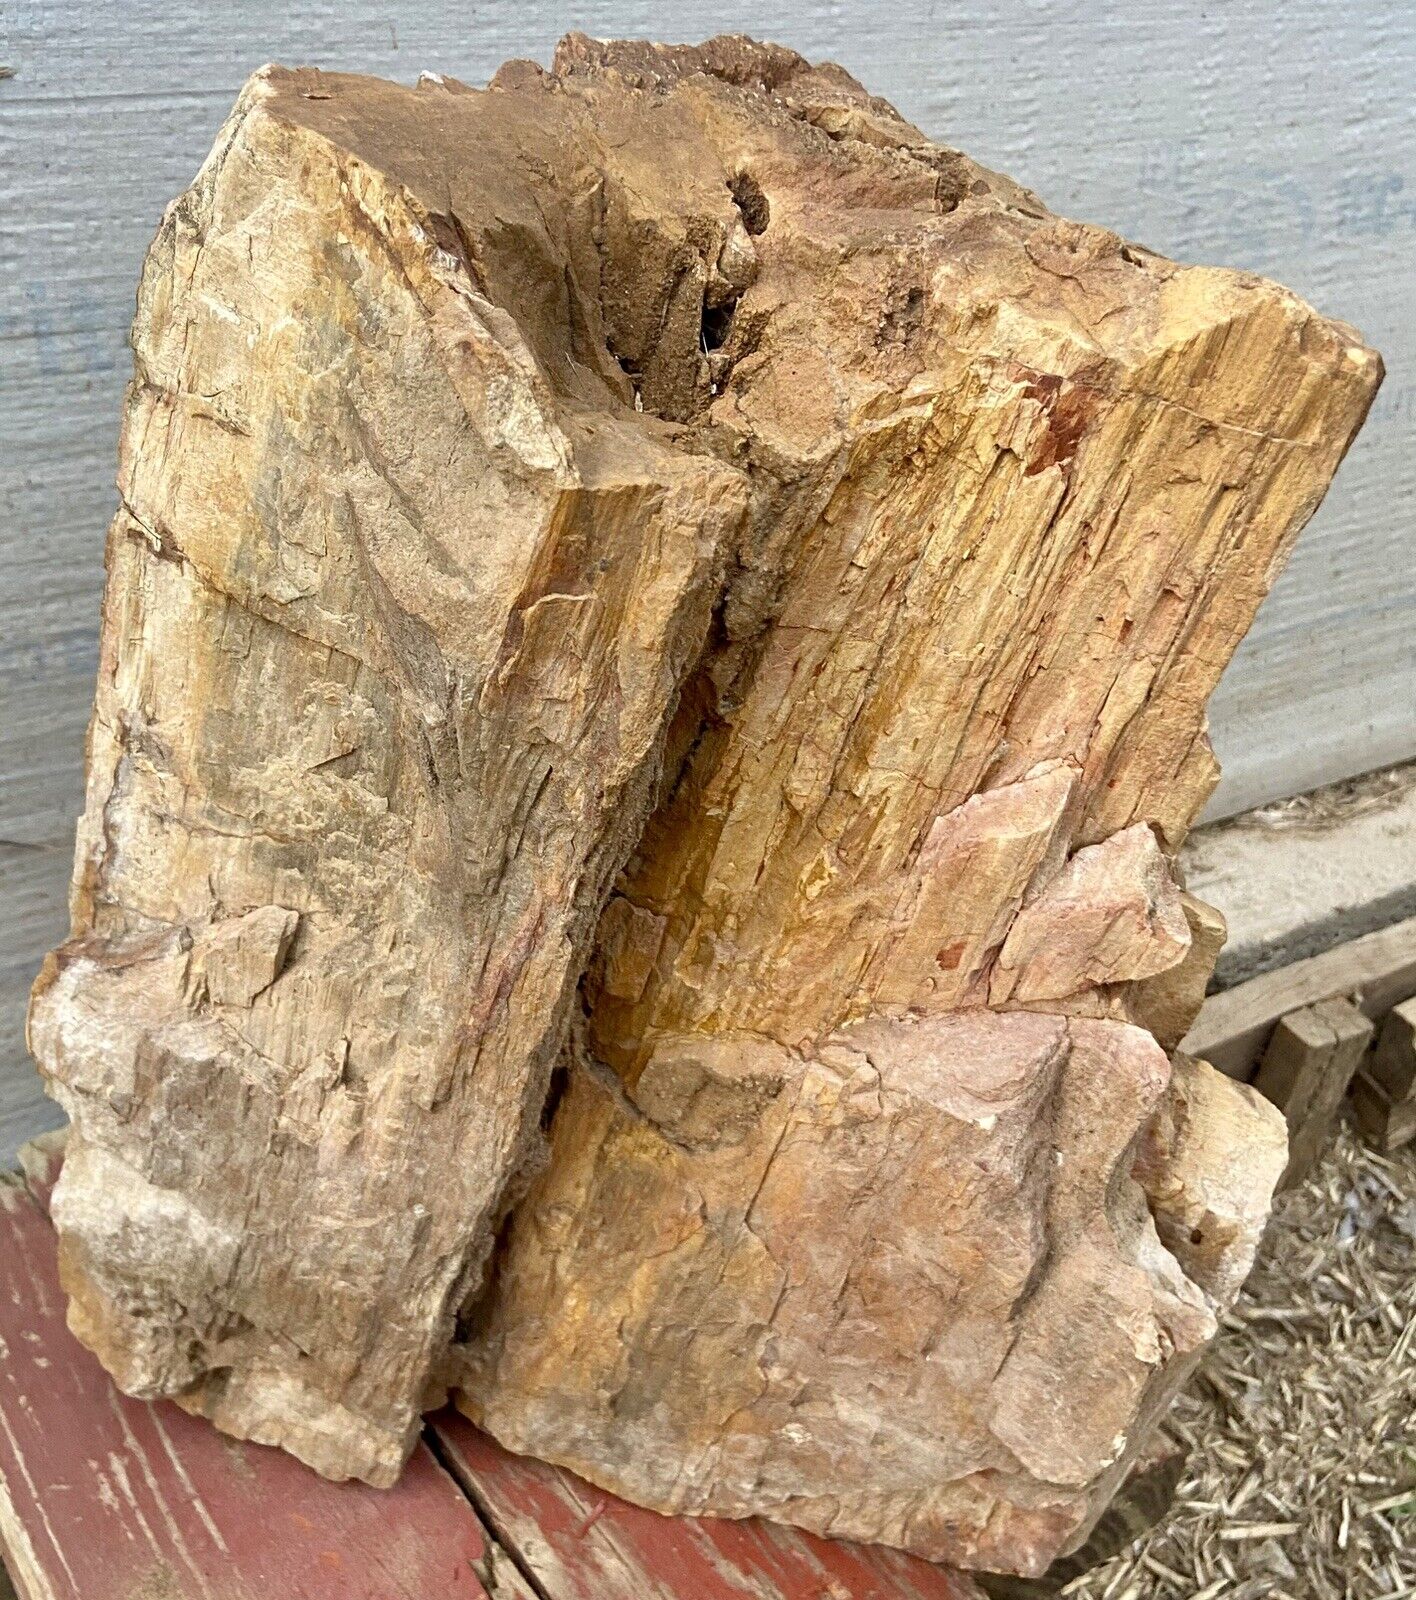 UNBELIEVABLE* 40 Lb 3/4round Petrified Wood-Trunk Section Great Color With Druzy